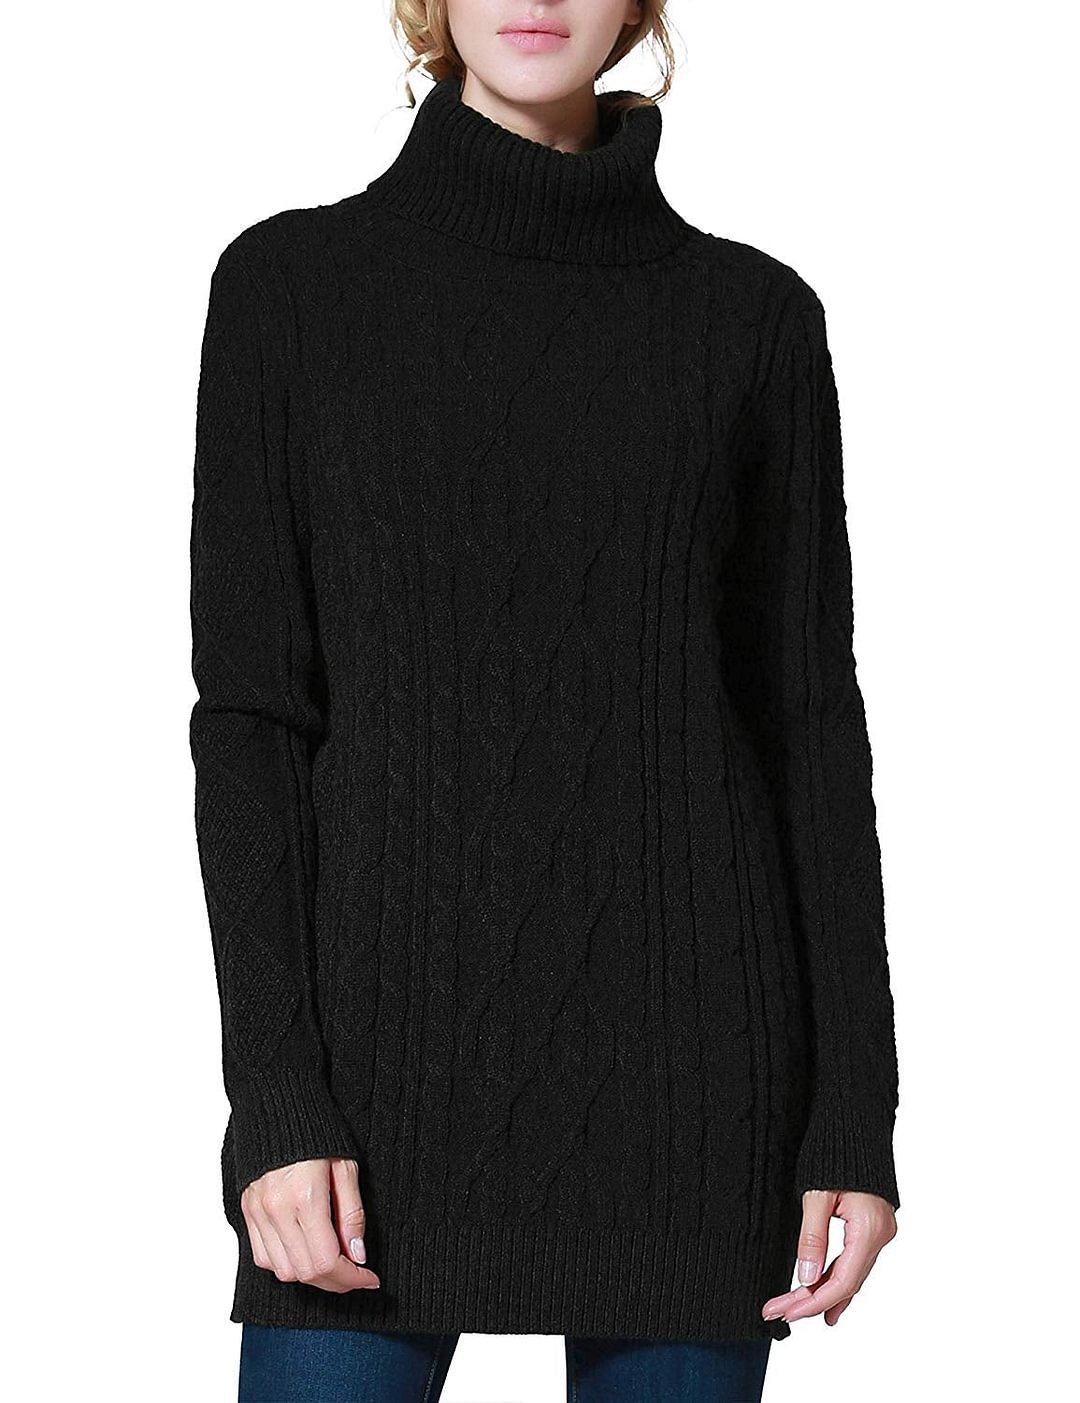 Women's Long Sweater Turtleneck Cable Knit Tunic Sweater Tops long tunic sweater